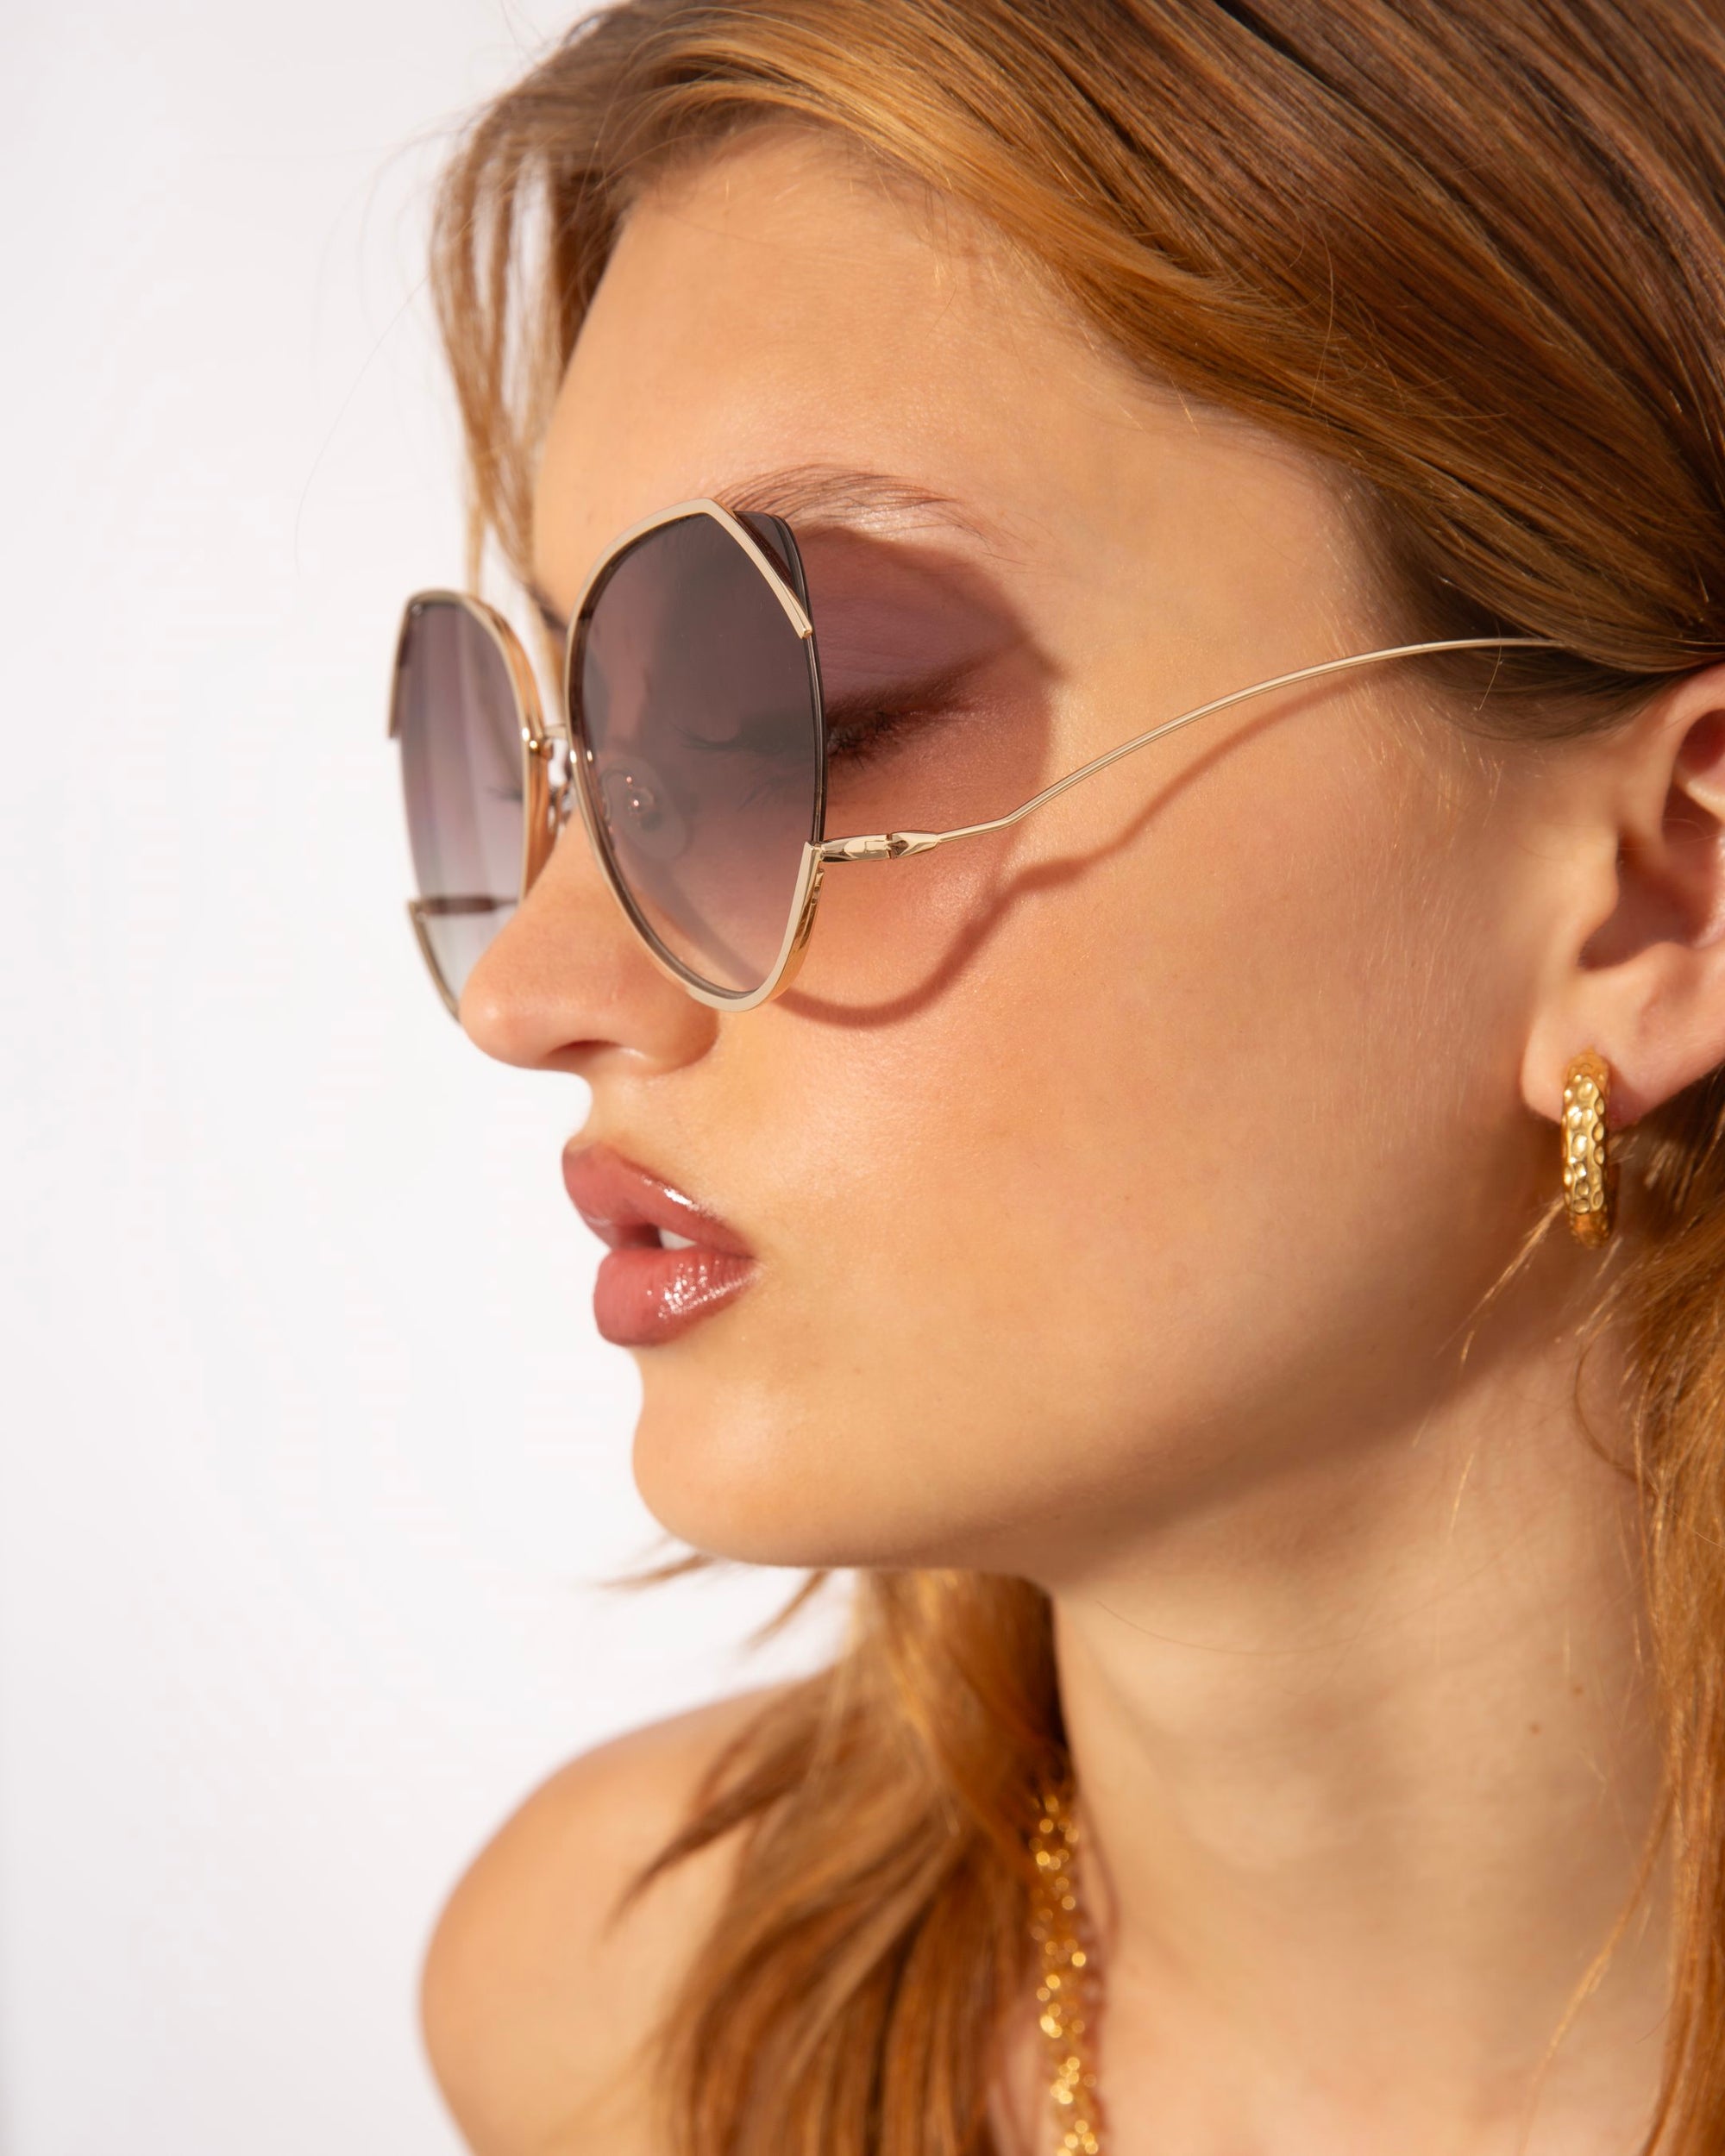 A young woman with light brown hair wearing large, round For Art&#39;s Sake® Wonderland sunglasses featuring jadestone nose pads and gold frames. She sports small gold hoop earrings. The lighting highlights her clear skin and neutral makeup, and she appears against a plain white background.